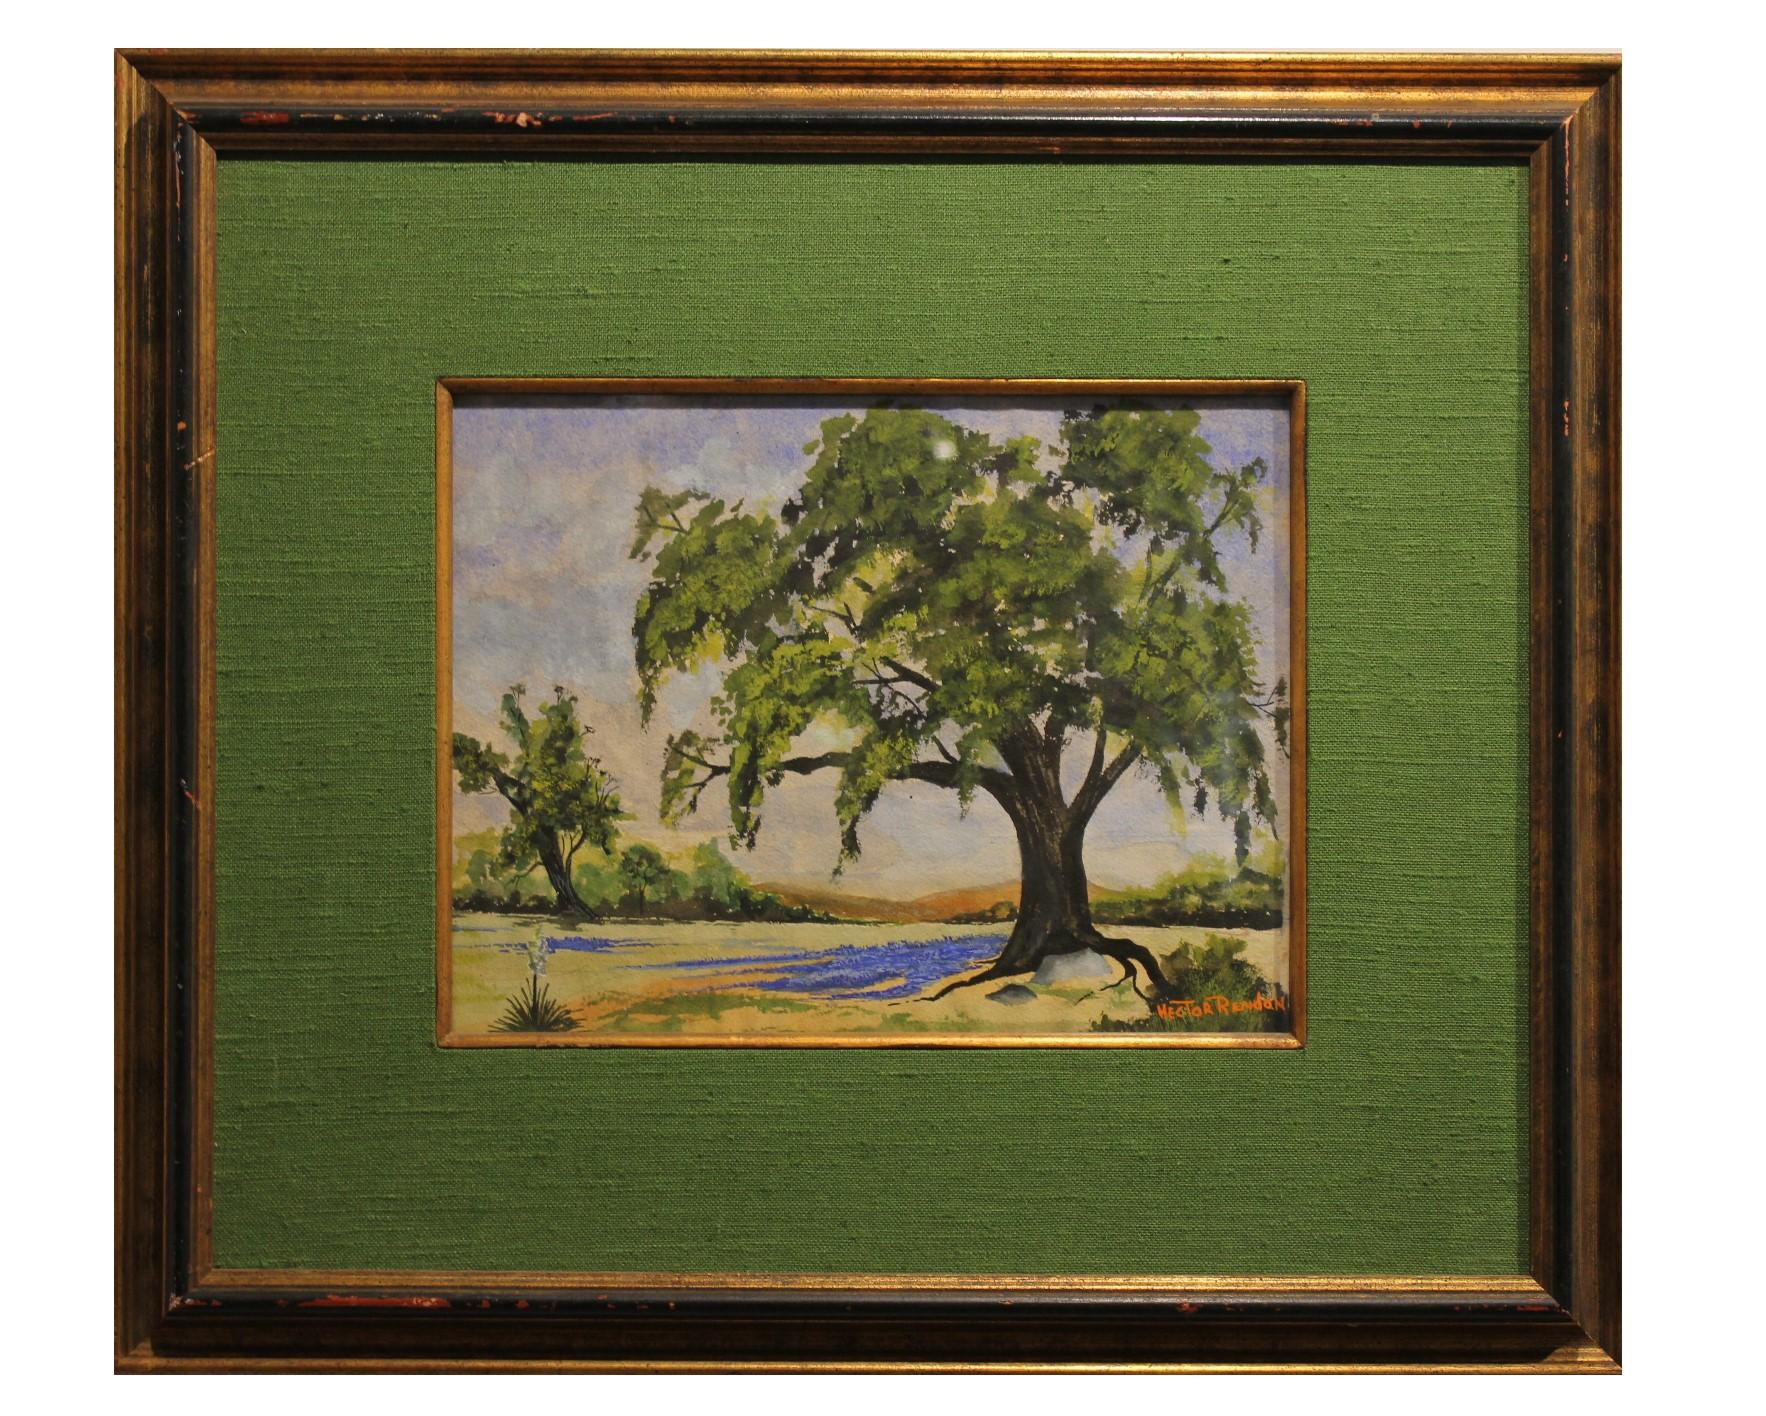 Hector Rendon Landscape Painting - Rural Landscape with a Tree 